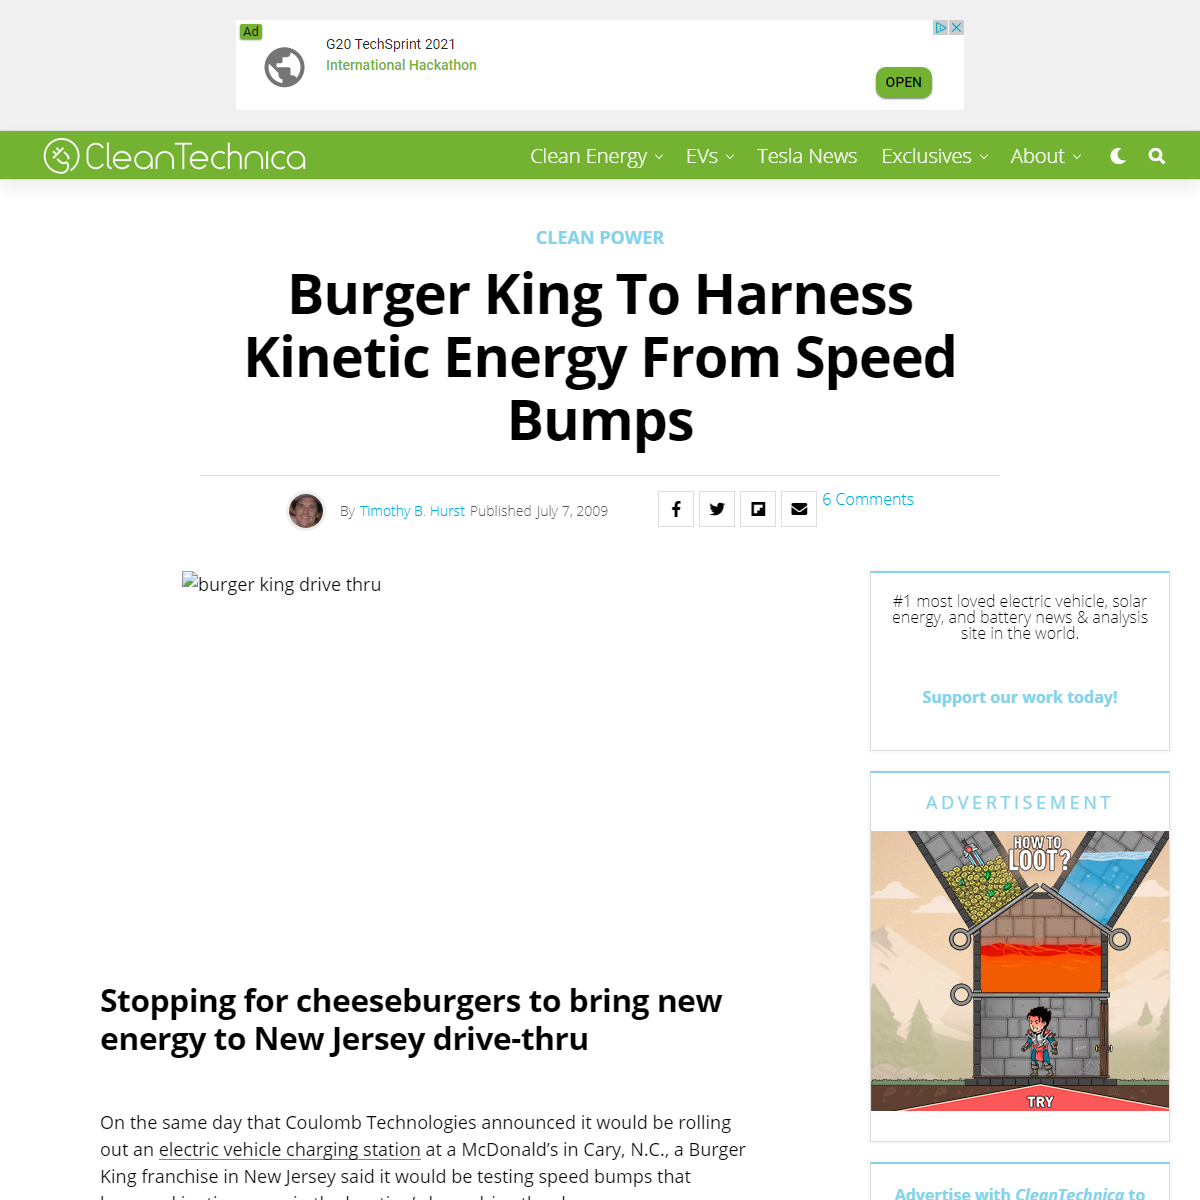 A complete backup of https://cleantechnica.com/2009/07/07/burger-king-to-harness-kinetic-energy-from-speed-bumps/